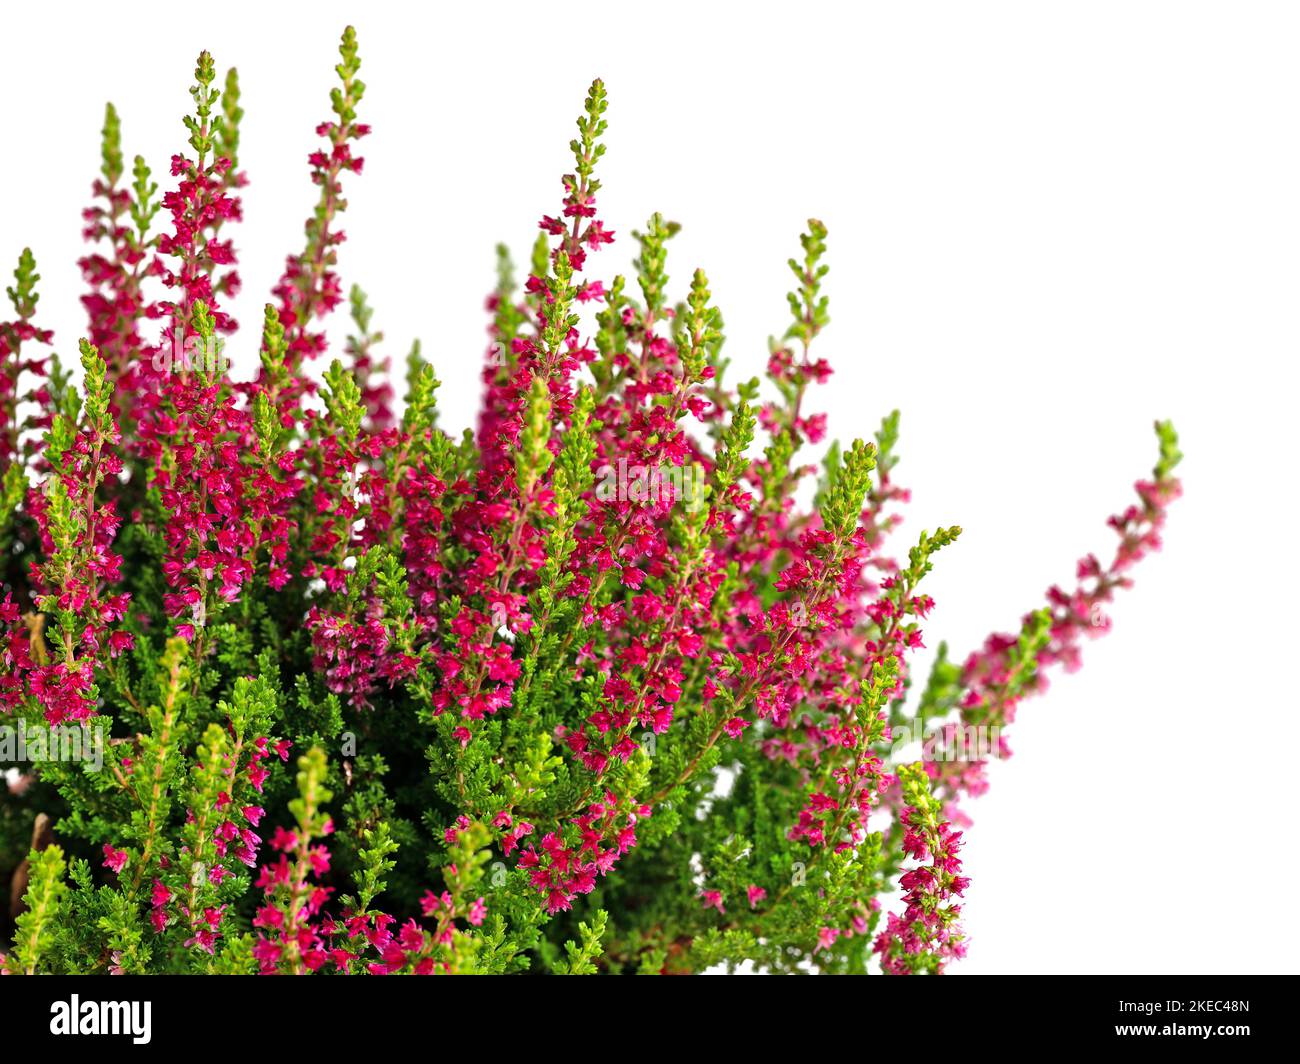 Flowering heather against a white background Stock Photo